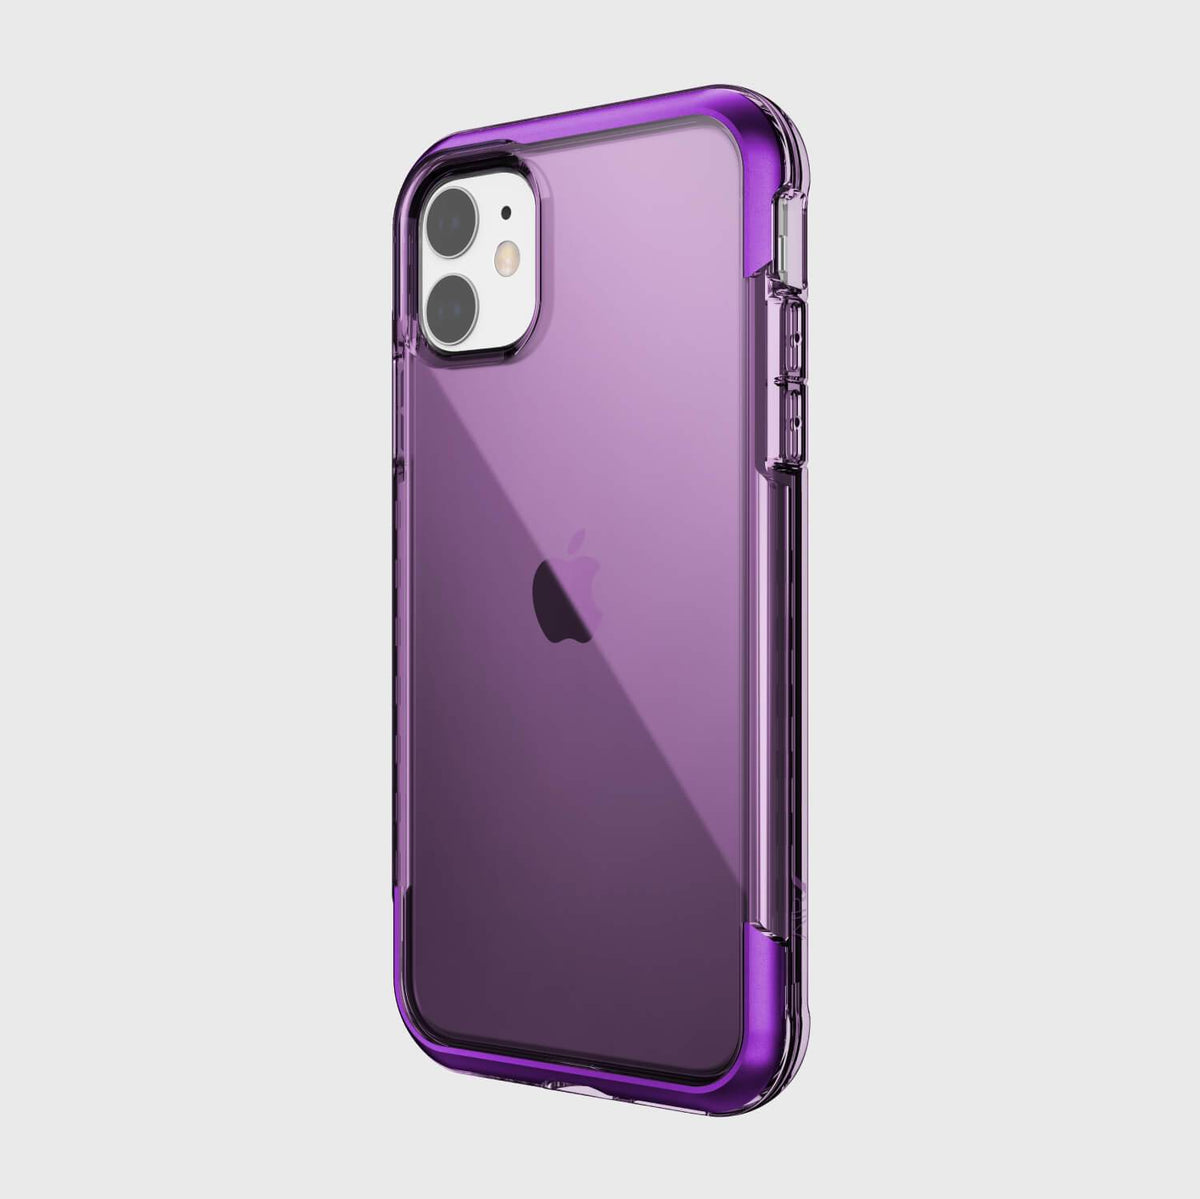 The purple Raptic Air iPhone 11 Pro case is shown on a white background. 
Revised Sentence: The purple Raptic Air iPhone 11 Pro Case - AIR is shown on a white background.